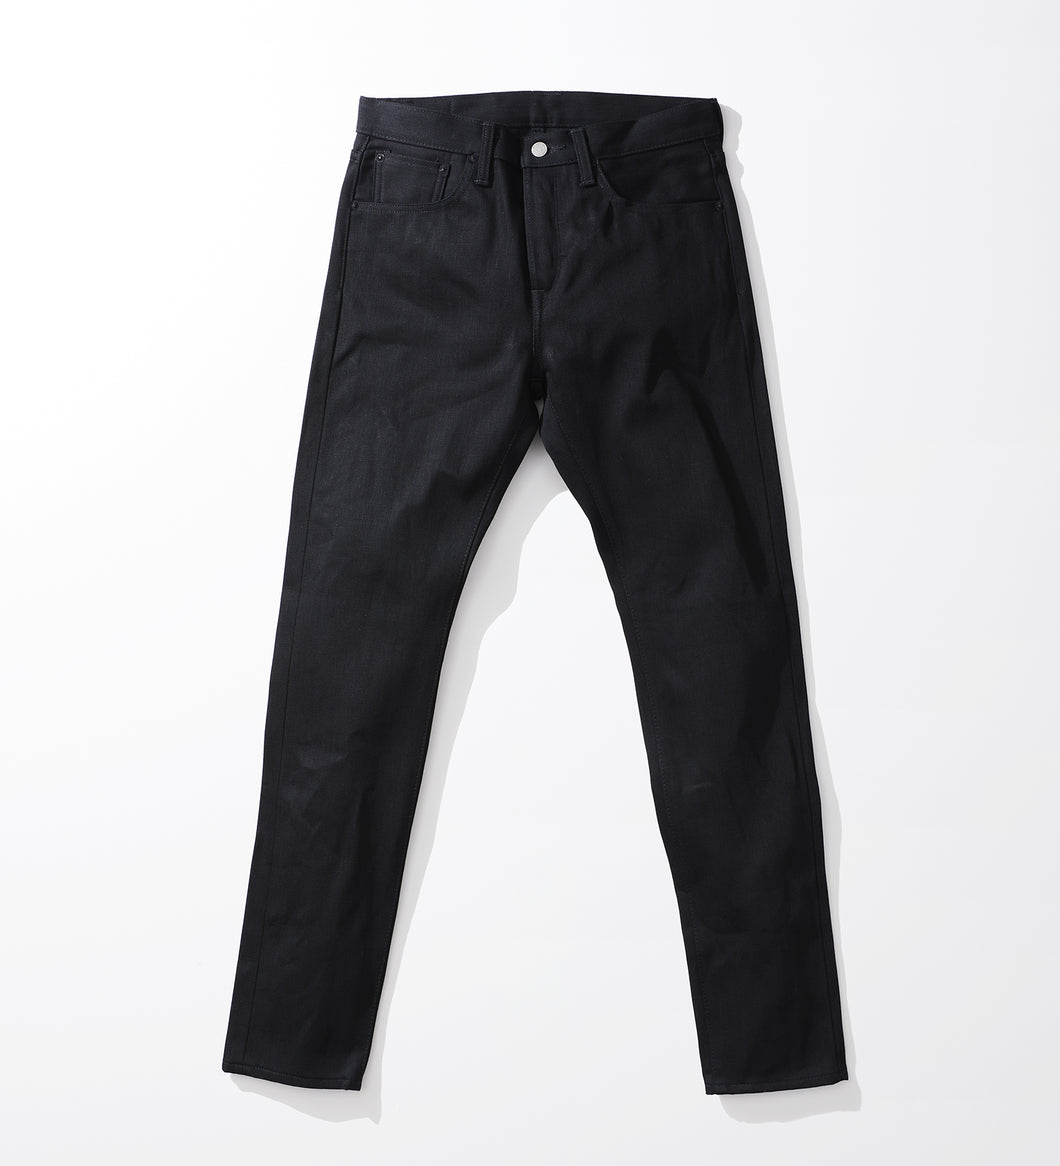 SLIM Tapered Black Unwashed [LENGTH 32 INCH]